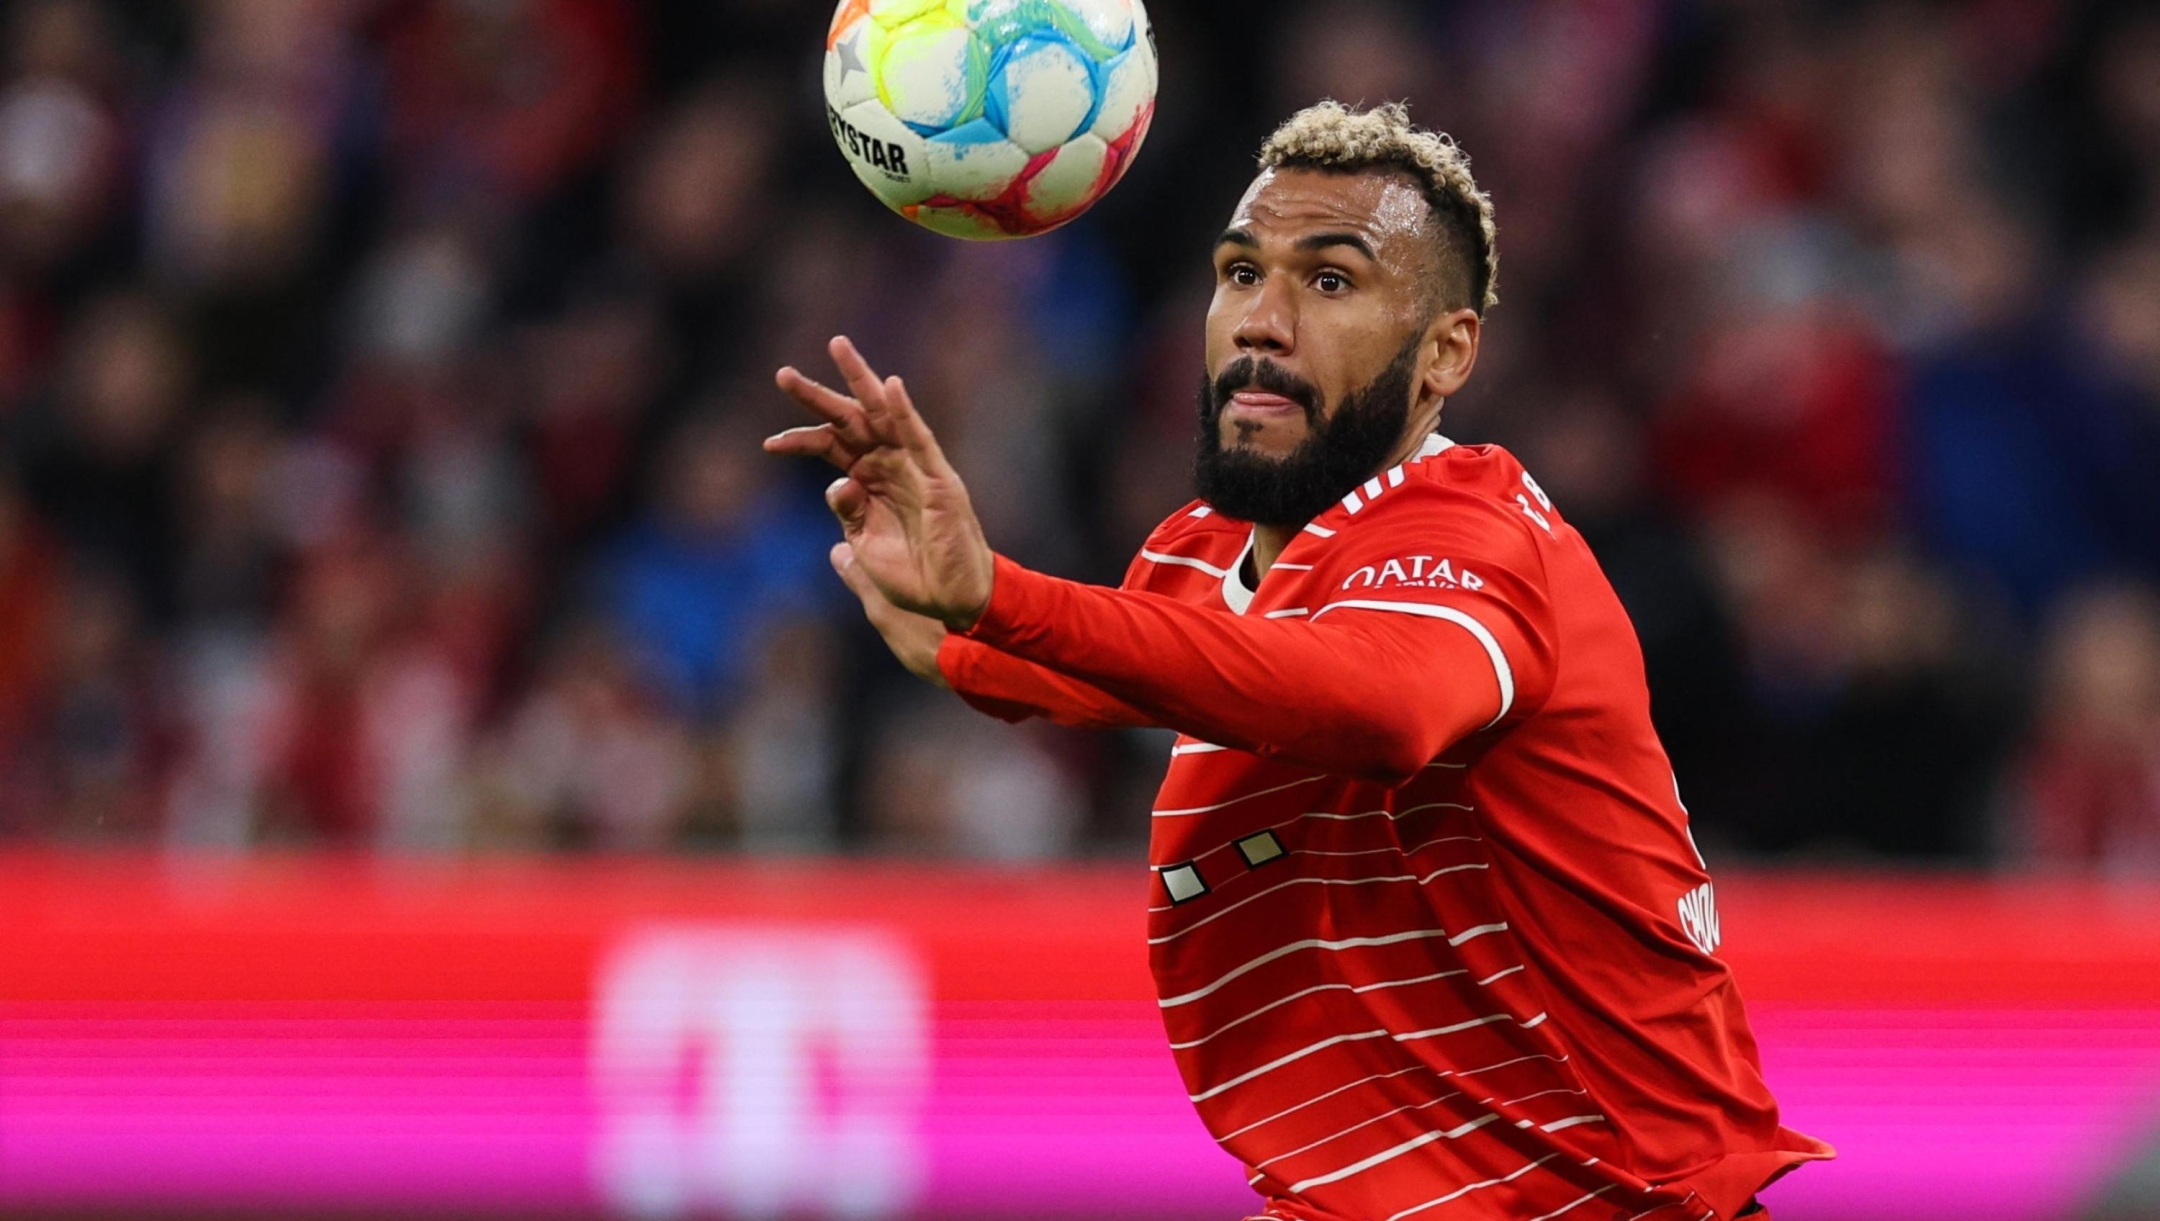 epa10554166 Munich's Eric Maxim Choupo-Moting in action during the German Bundesliga soccer match between FC Bayern Munich and Borussia Dortmund in Munich, Germany, 01 April 2023.  EPA/ANNA SZILAGYI CONDITIONS - ATTENTION: The DFL regulations prohibit any use of photographs as image sequences and/or quasi-video.